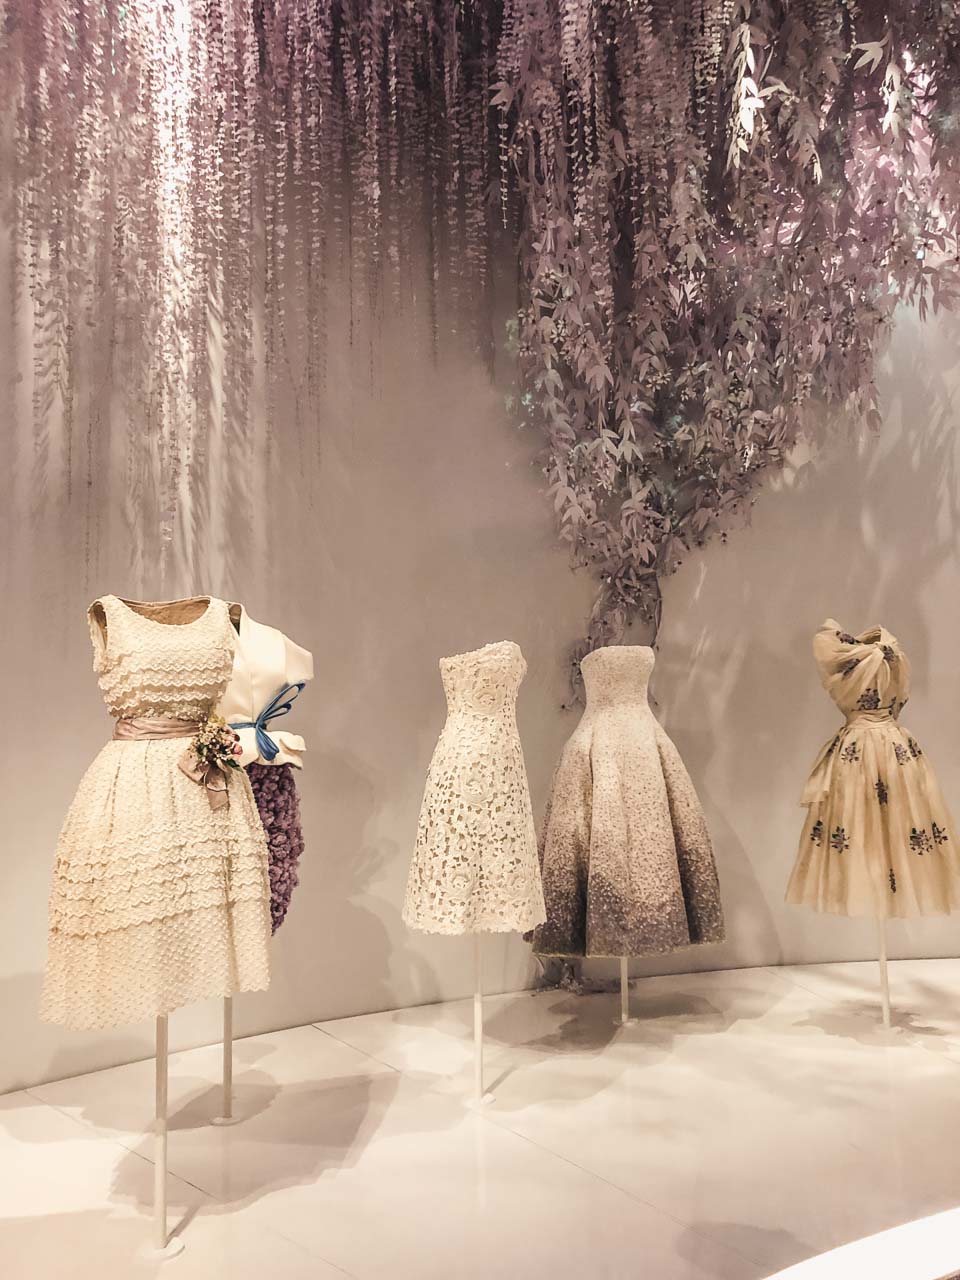 Dior gowns on display in the garden room of the Dior exhibition at the Victoria and Albert Museum in London